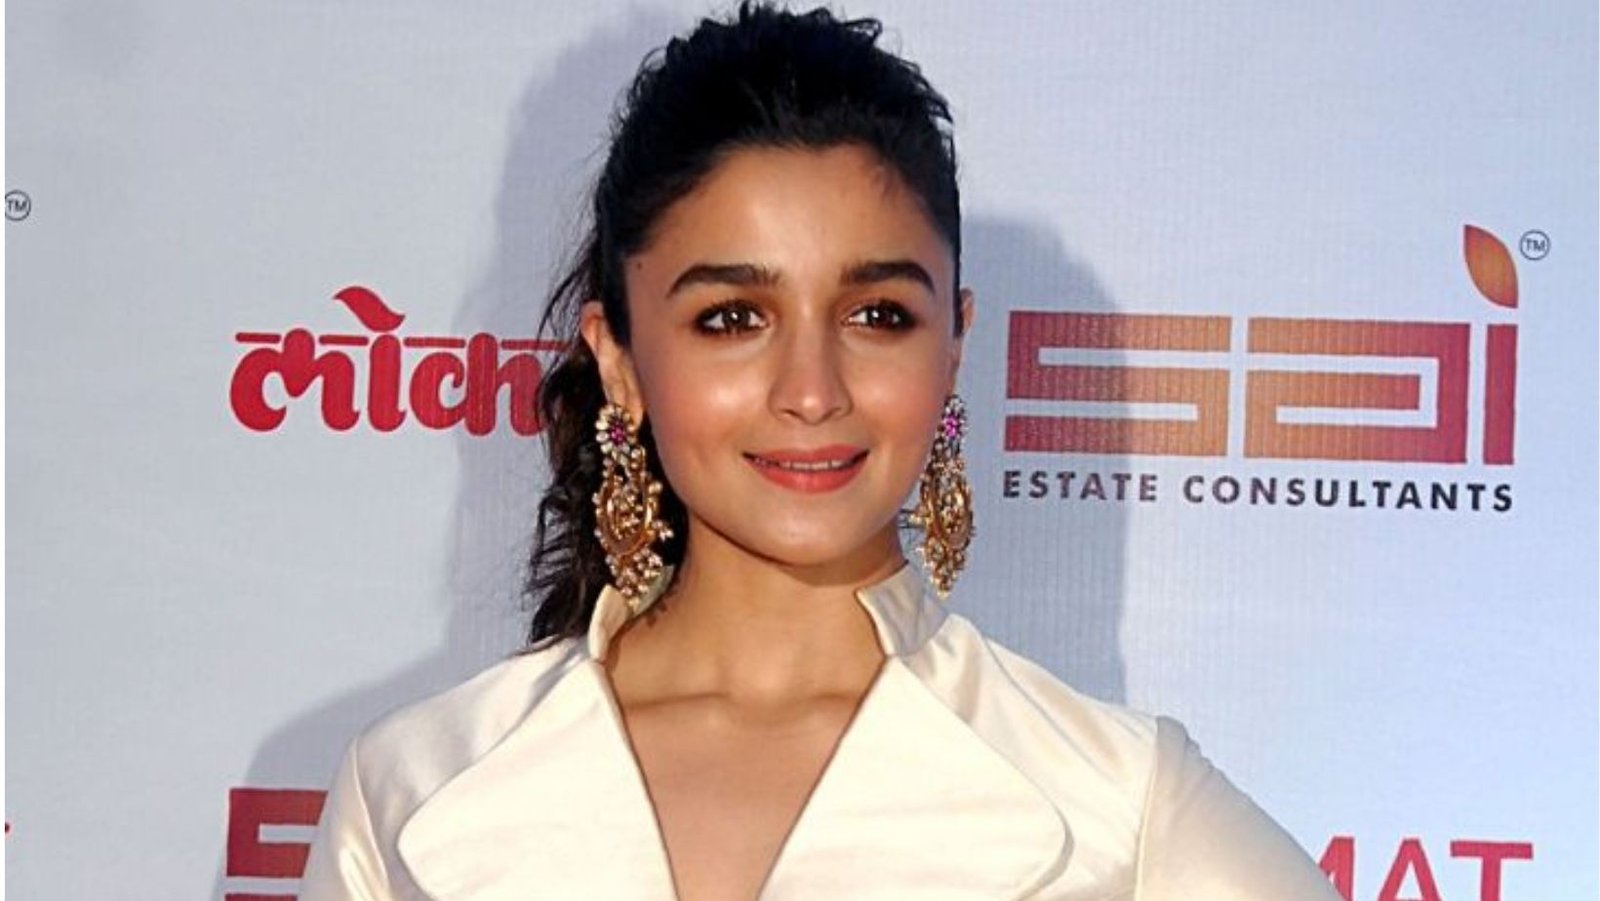 Initial reactions to "Darlings" state that Alia Bhatt's movie strongly condemns domestic violence